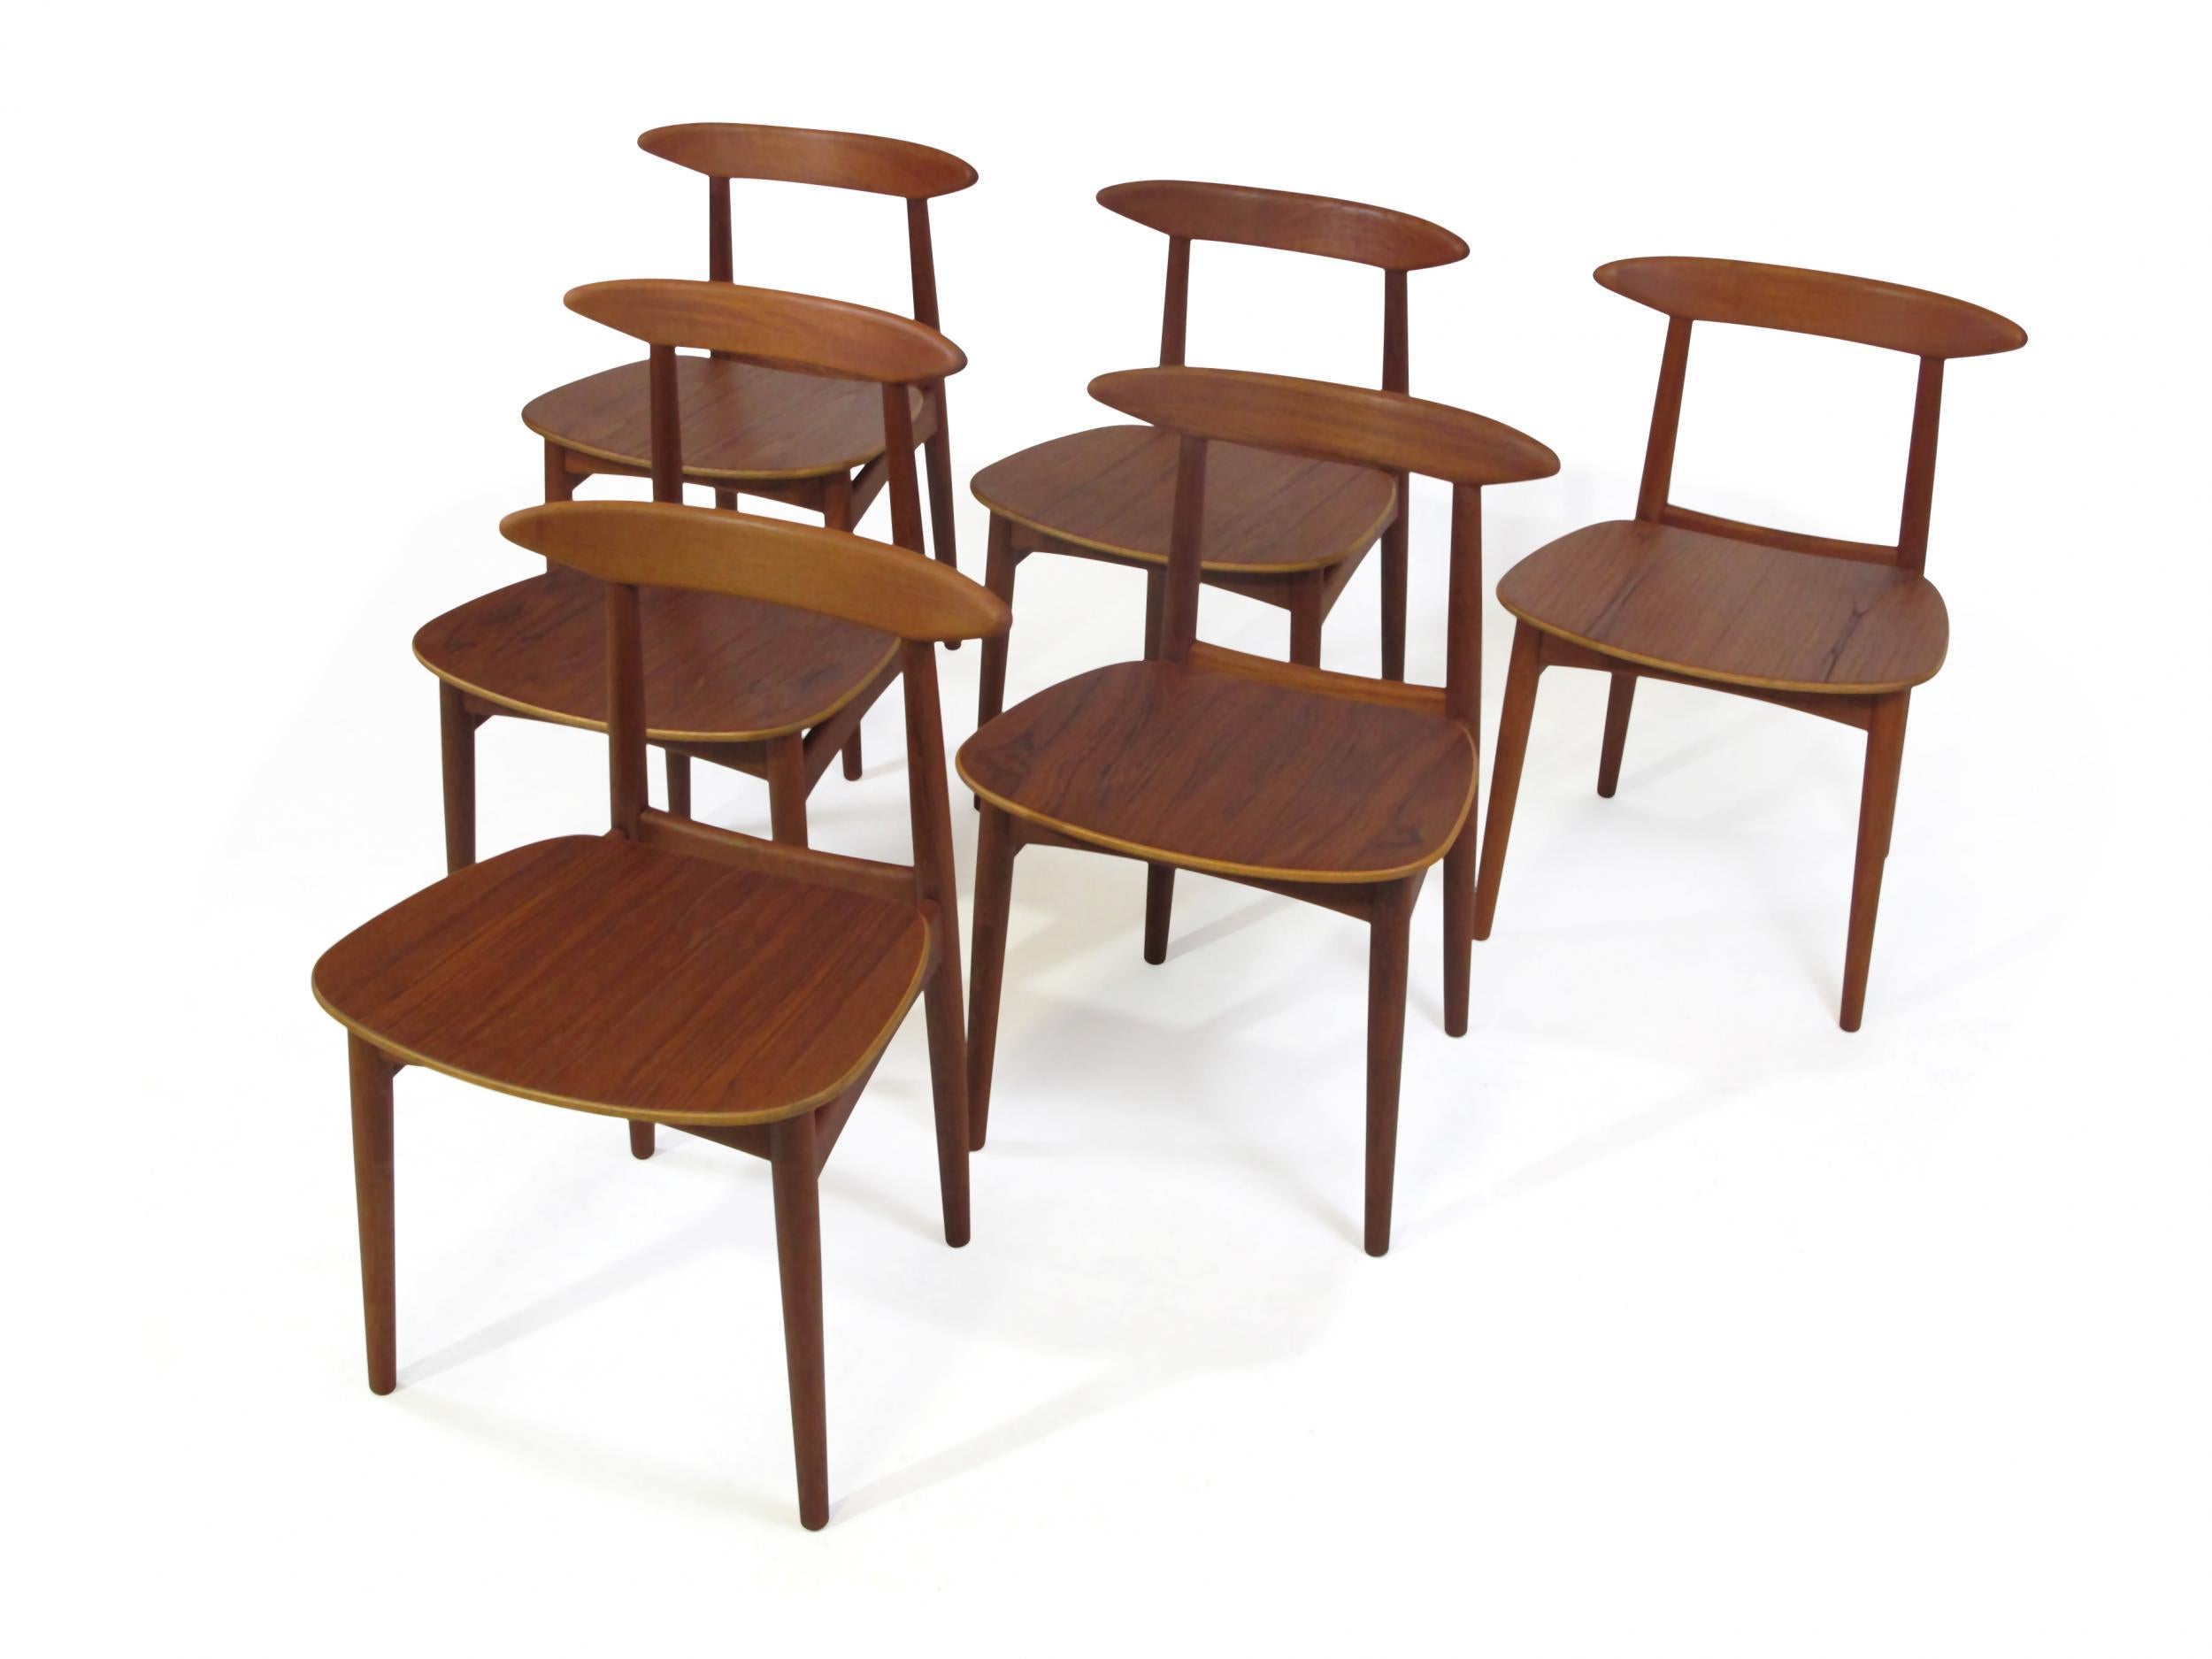 Six midcentury teak dining chairs attributed to Danish designer Kurt Ostervig. Solid teak frames, sculpted backrest with wood seats. The chairs have been professionally restored by our team of craftsmen. Excellent condition.